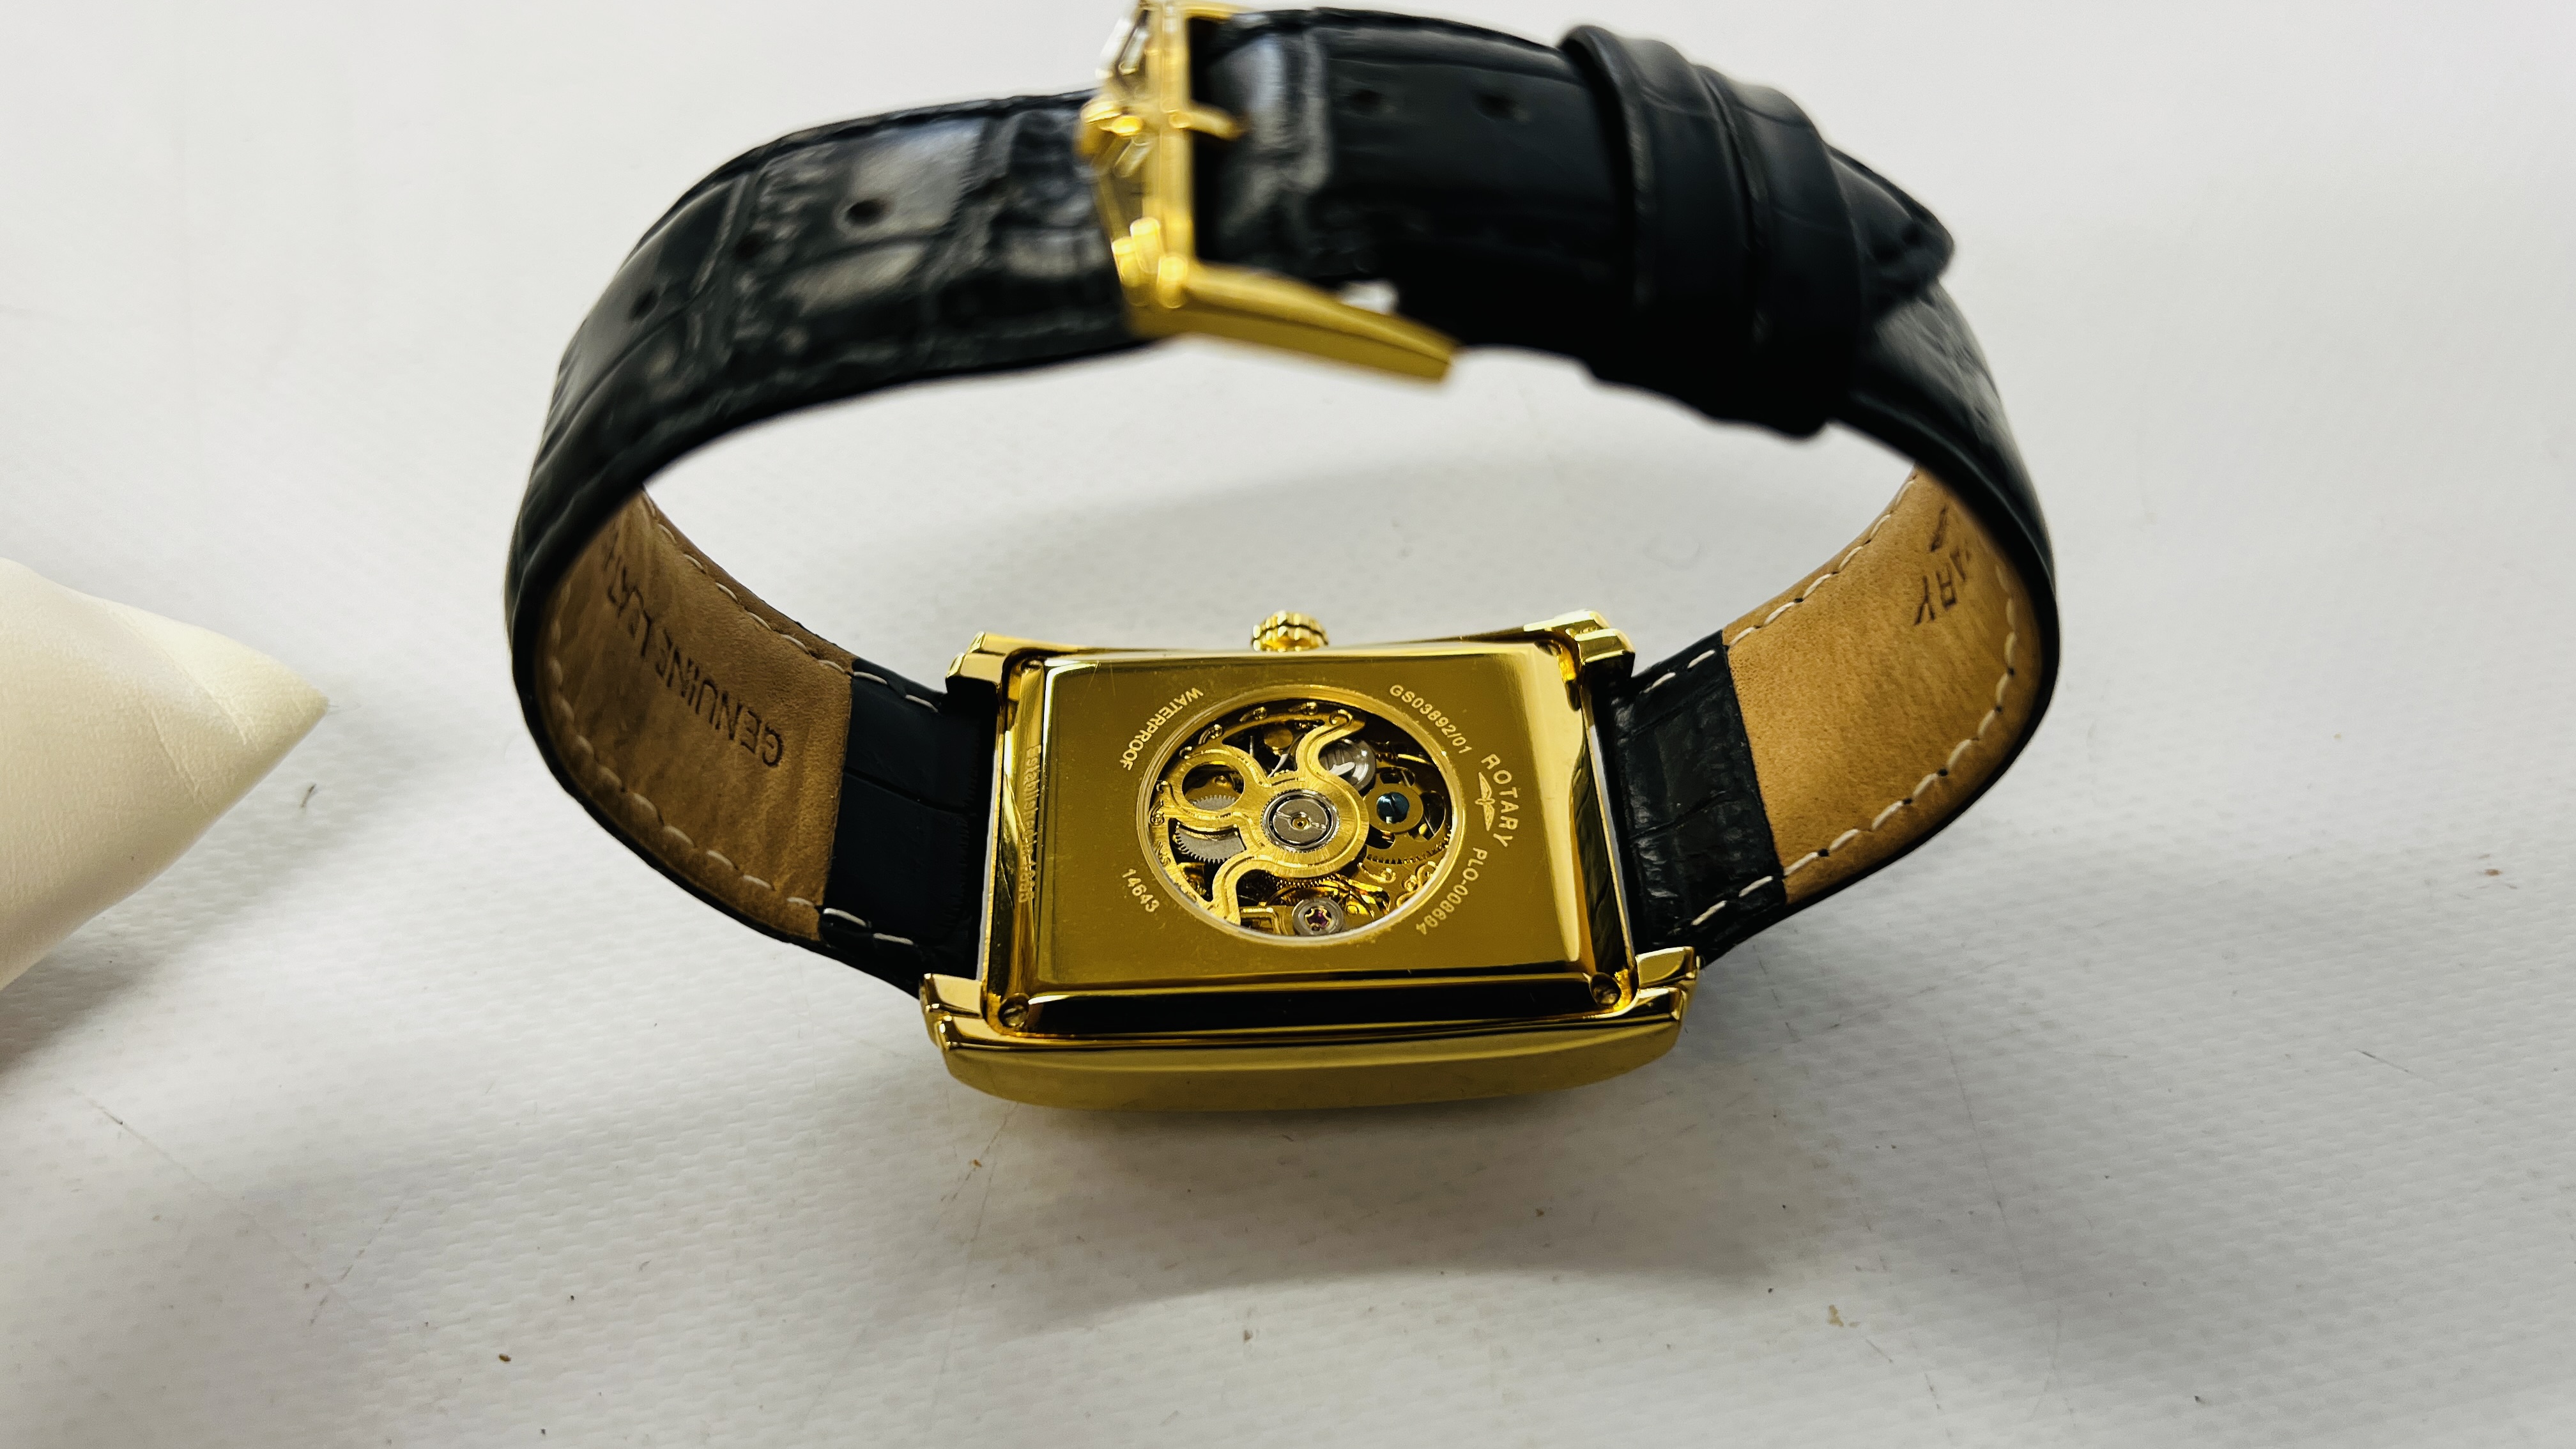 A GENT'S ROTARY AUTOMATIC WRIST WATCH ON BLACK LEATHER STRAP WITH ORIGINAL BOX AND GUARANTEE. - Image 6 of 9